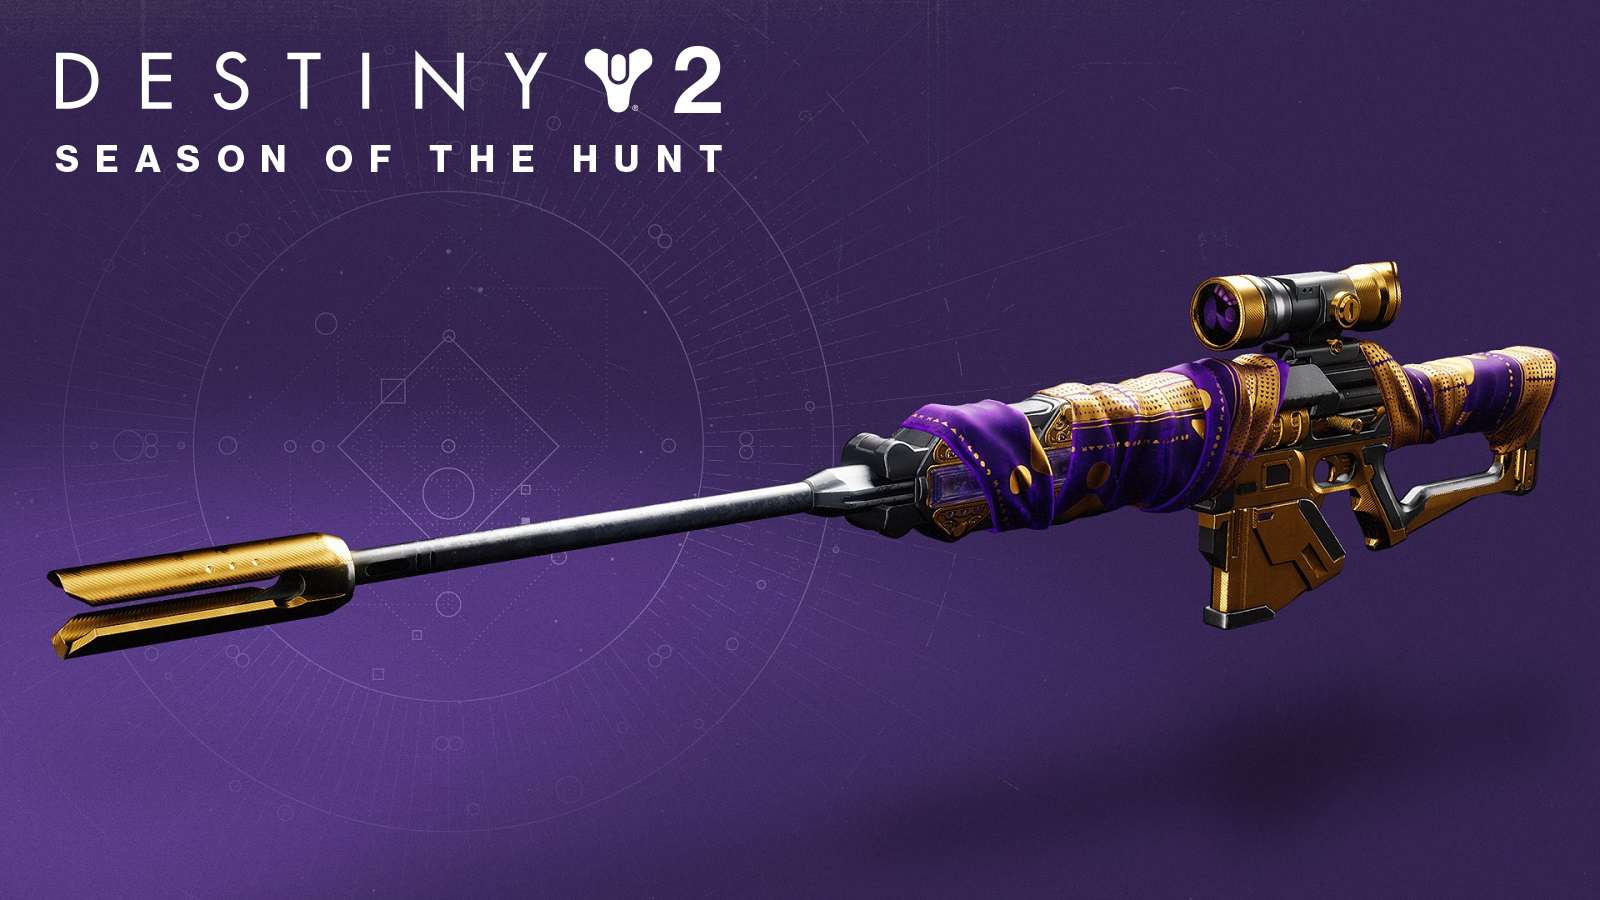 Destiny 2 Adored Sniper With Season of the Hunt Text